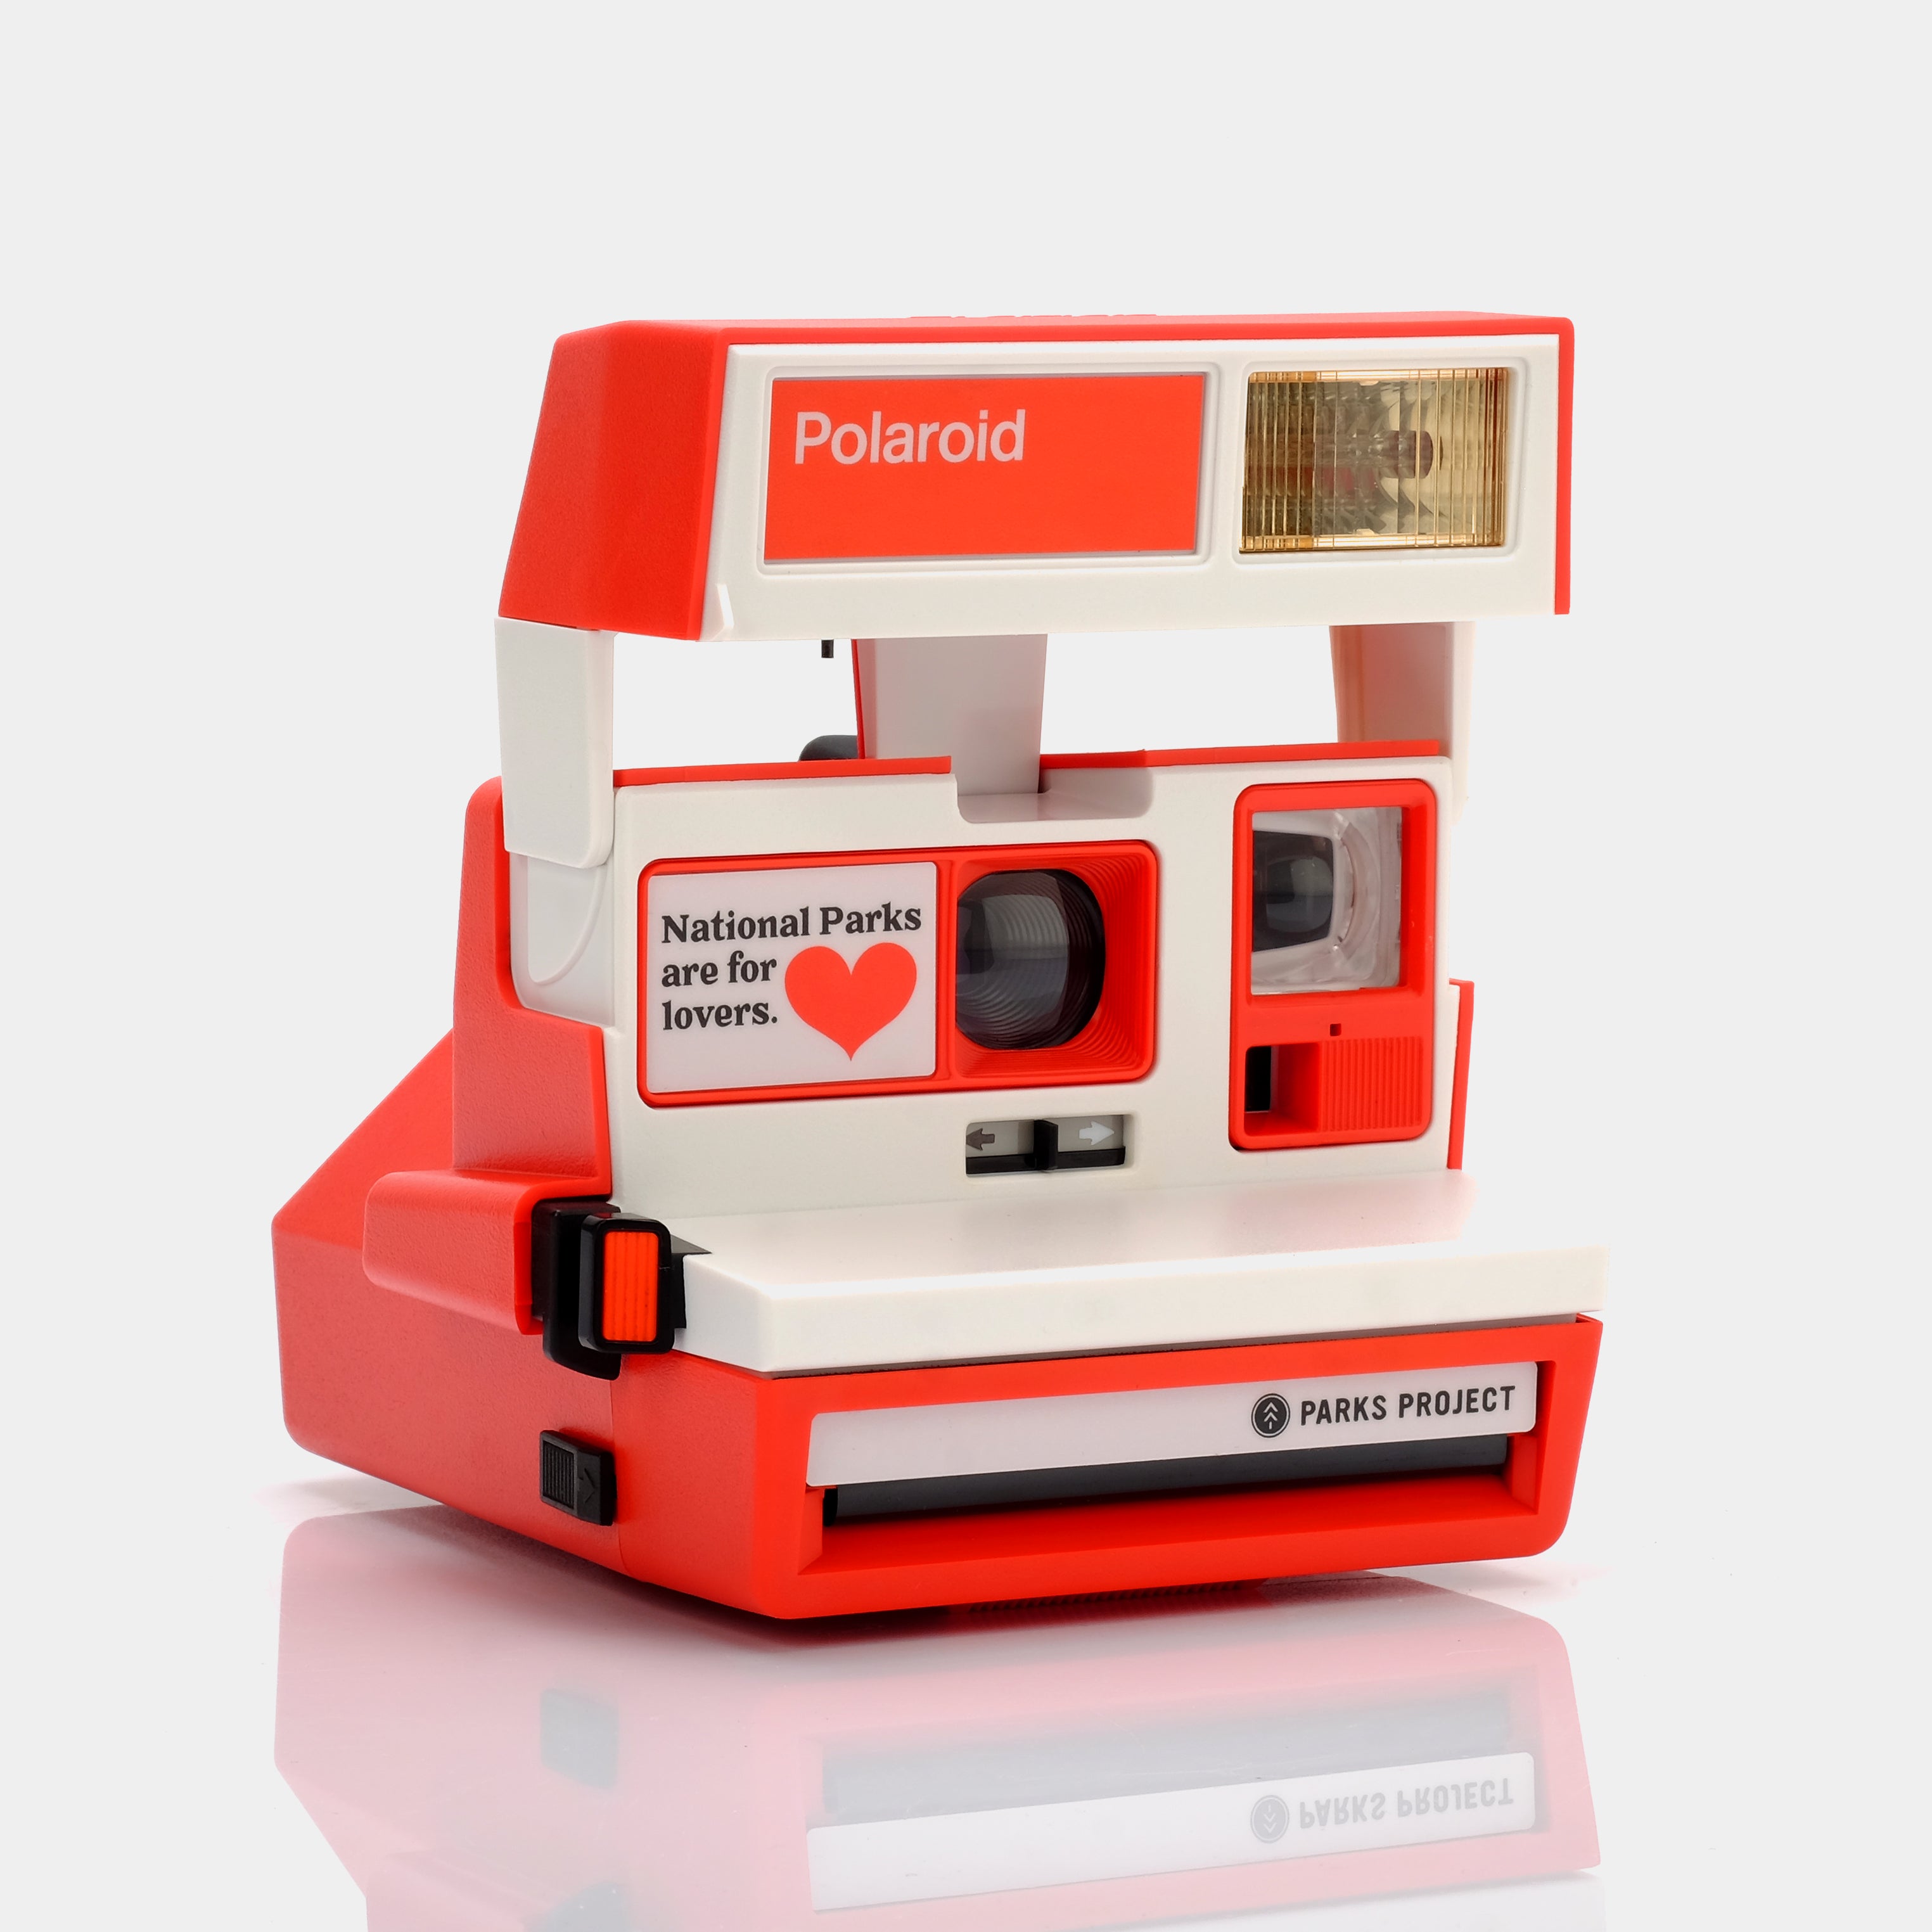 Polaroid 600 National Parks Are For Lovers Parks Project Instant Film Camera